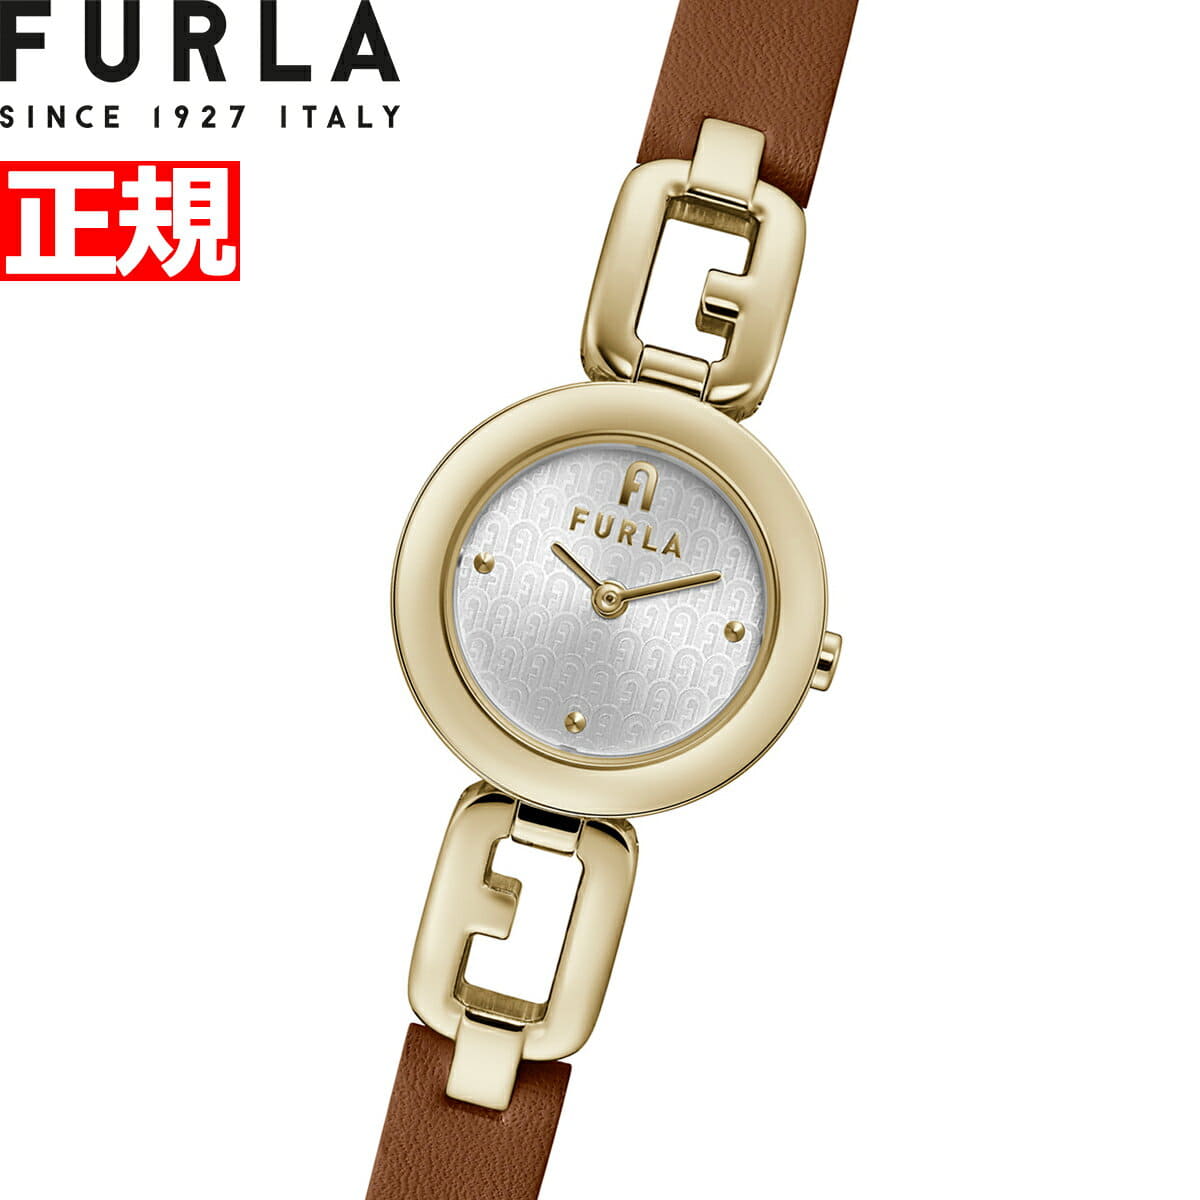 New]0:00! Up to 2,000 & up to 55.5 times! It is FURLA FURLA